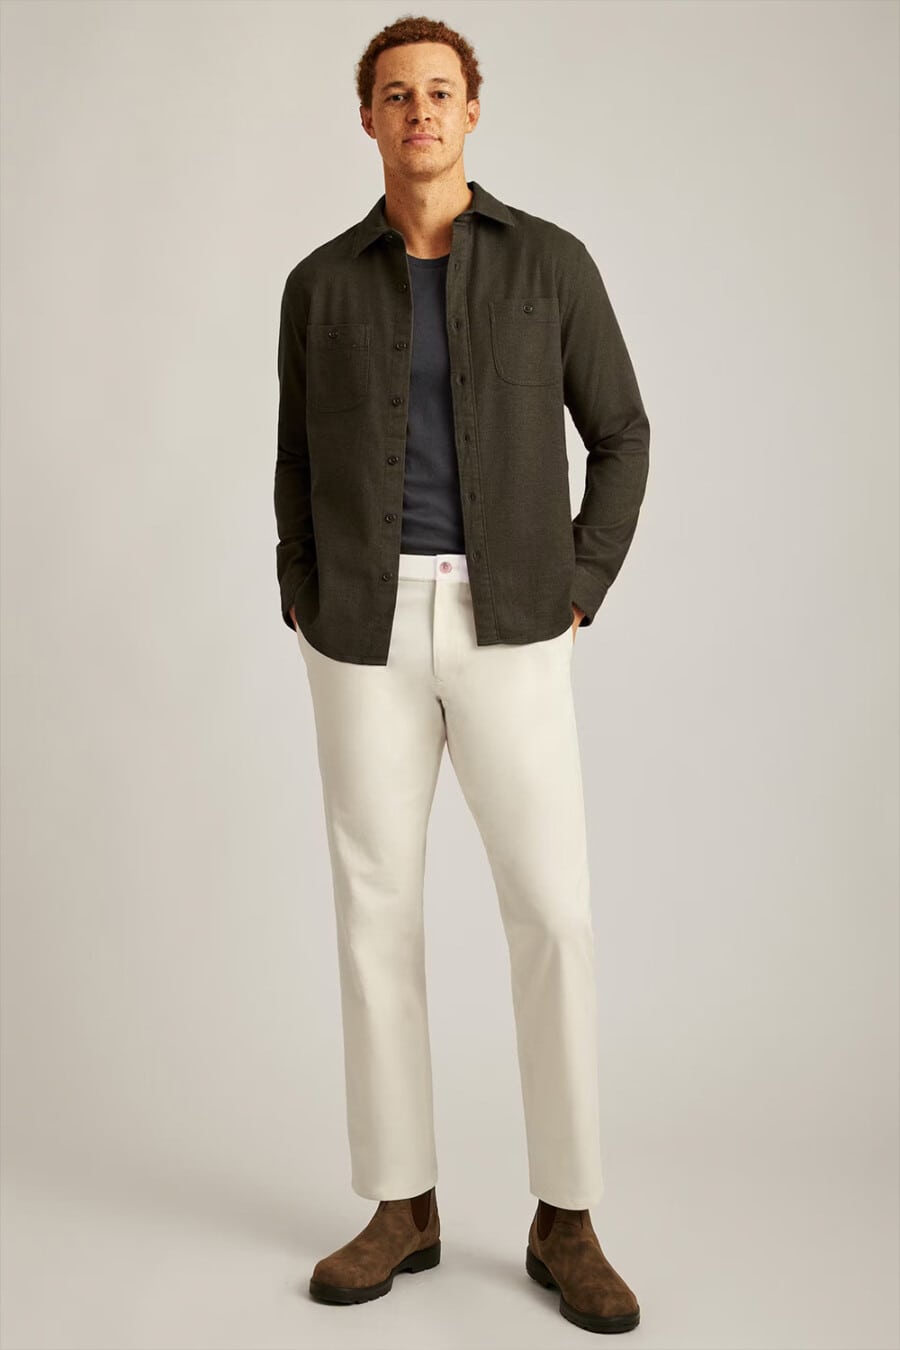 Men's cream pants, grey tucked in T-shirt, green/brown overshirt and brown suede Chelsea boots smart-casual outfit